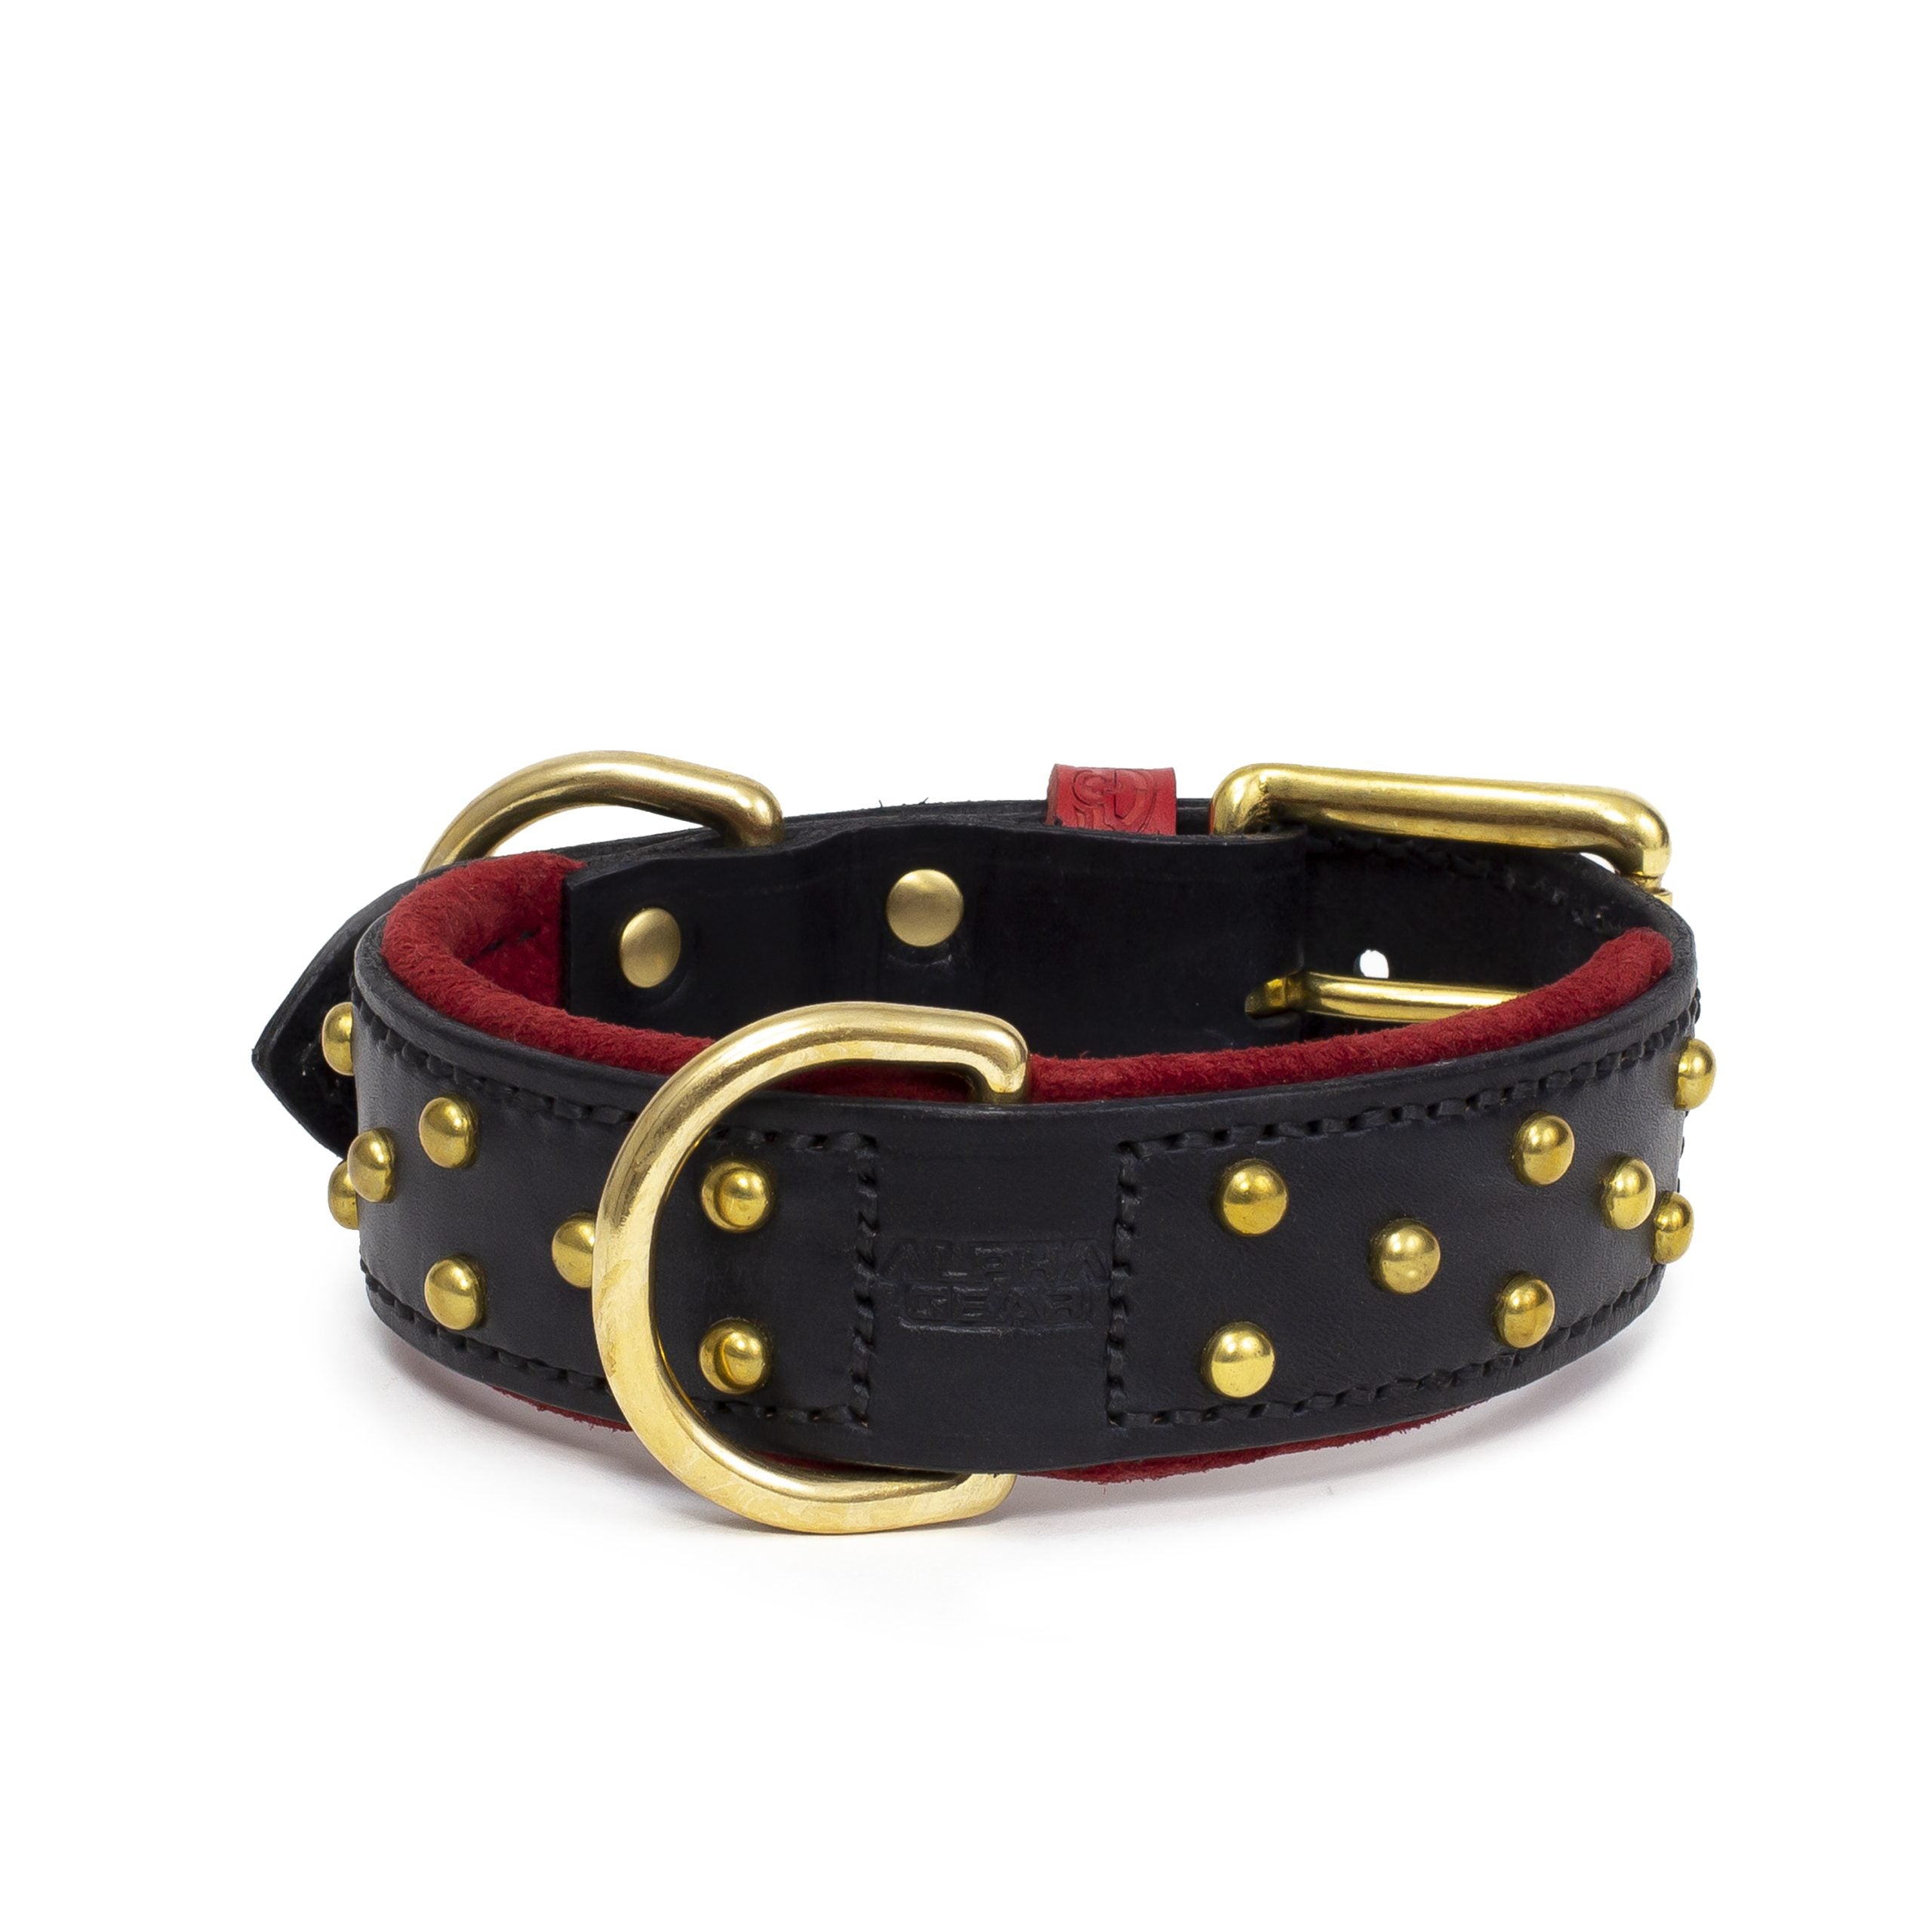 Leather Dog Collar (Adams Leather) - Black & Red